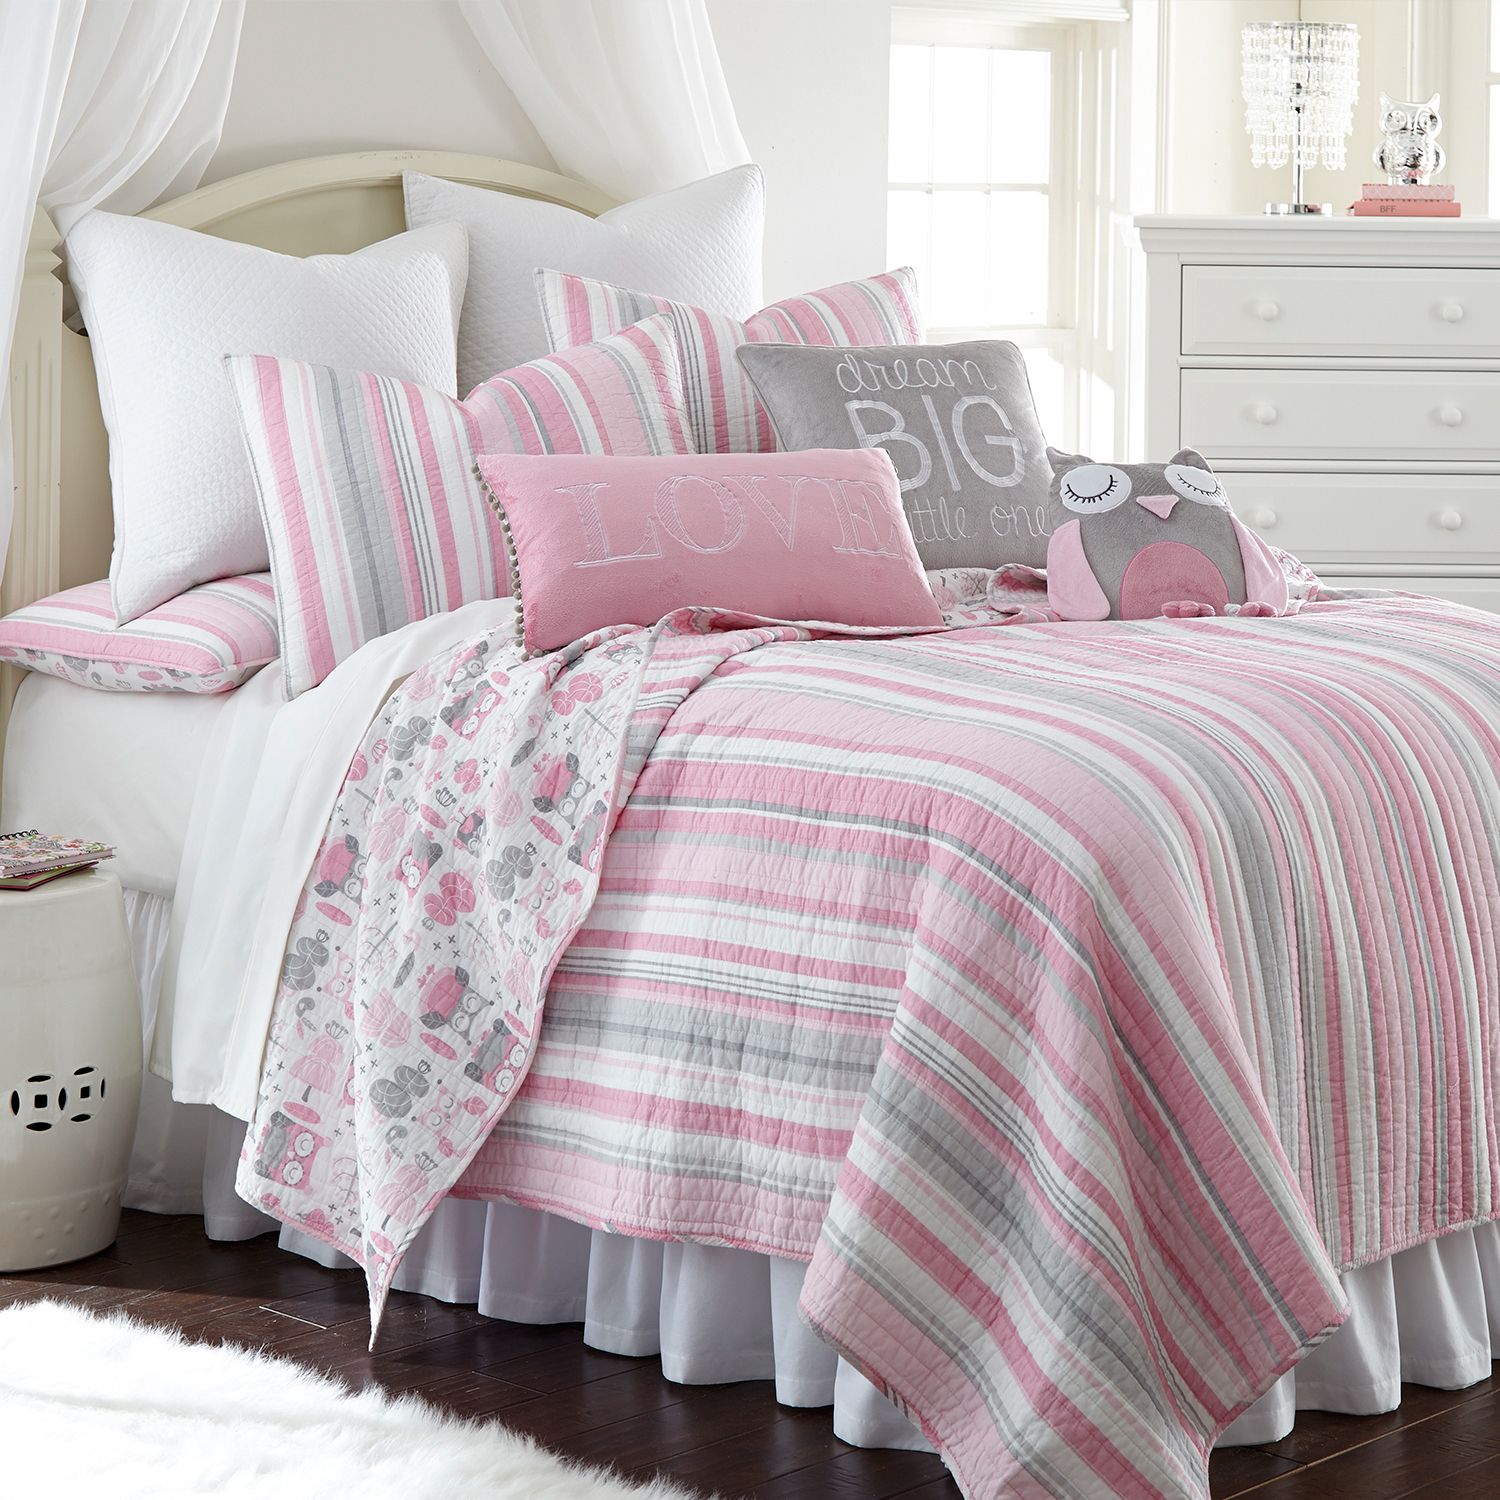 Image for Levtex Home Daniella Reversible Quilt Collection at Kohl's.